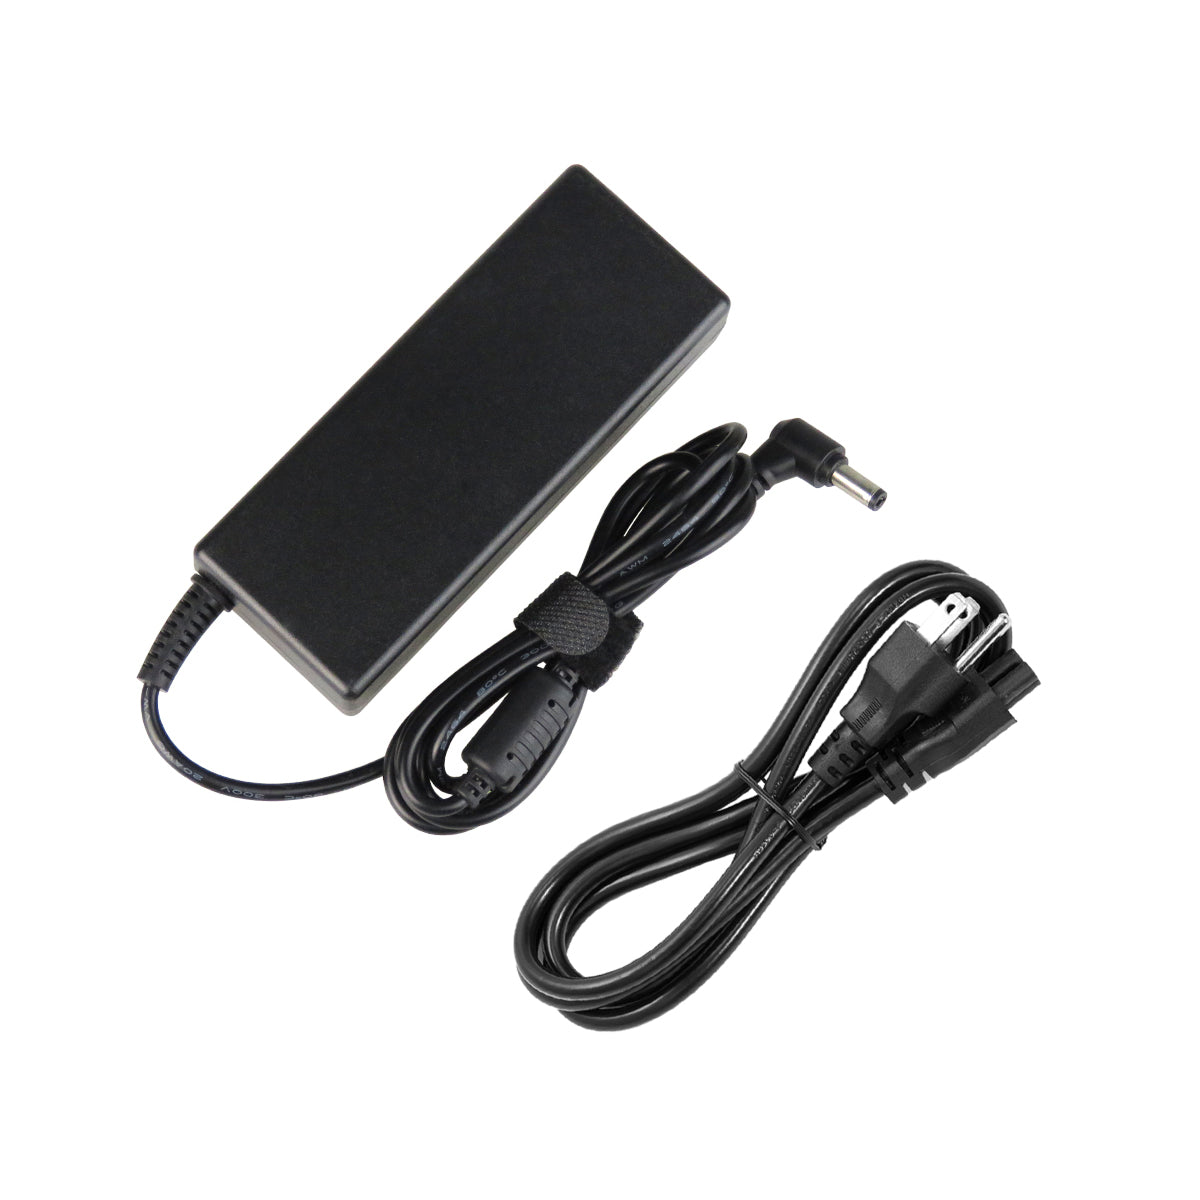 AC Adapter Charger for ASUS A8Se Laptop.